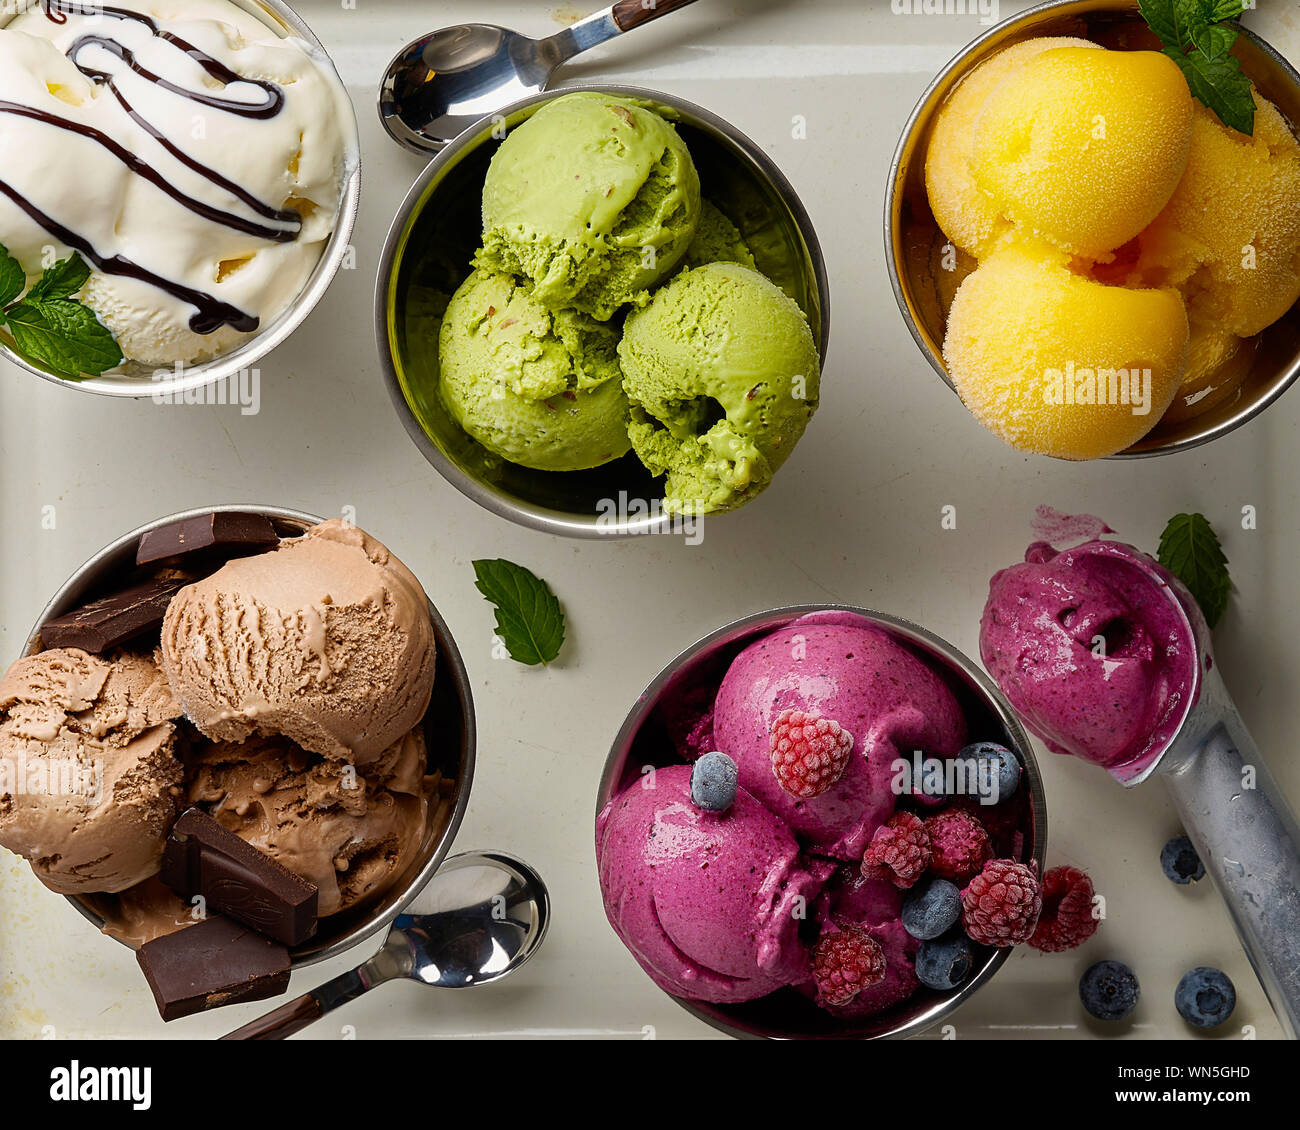 Assorted flavors and colors of gourmet Italian ice cream served on steel table. Mango, chocolate, green matcha ice cream Stock Photo